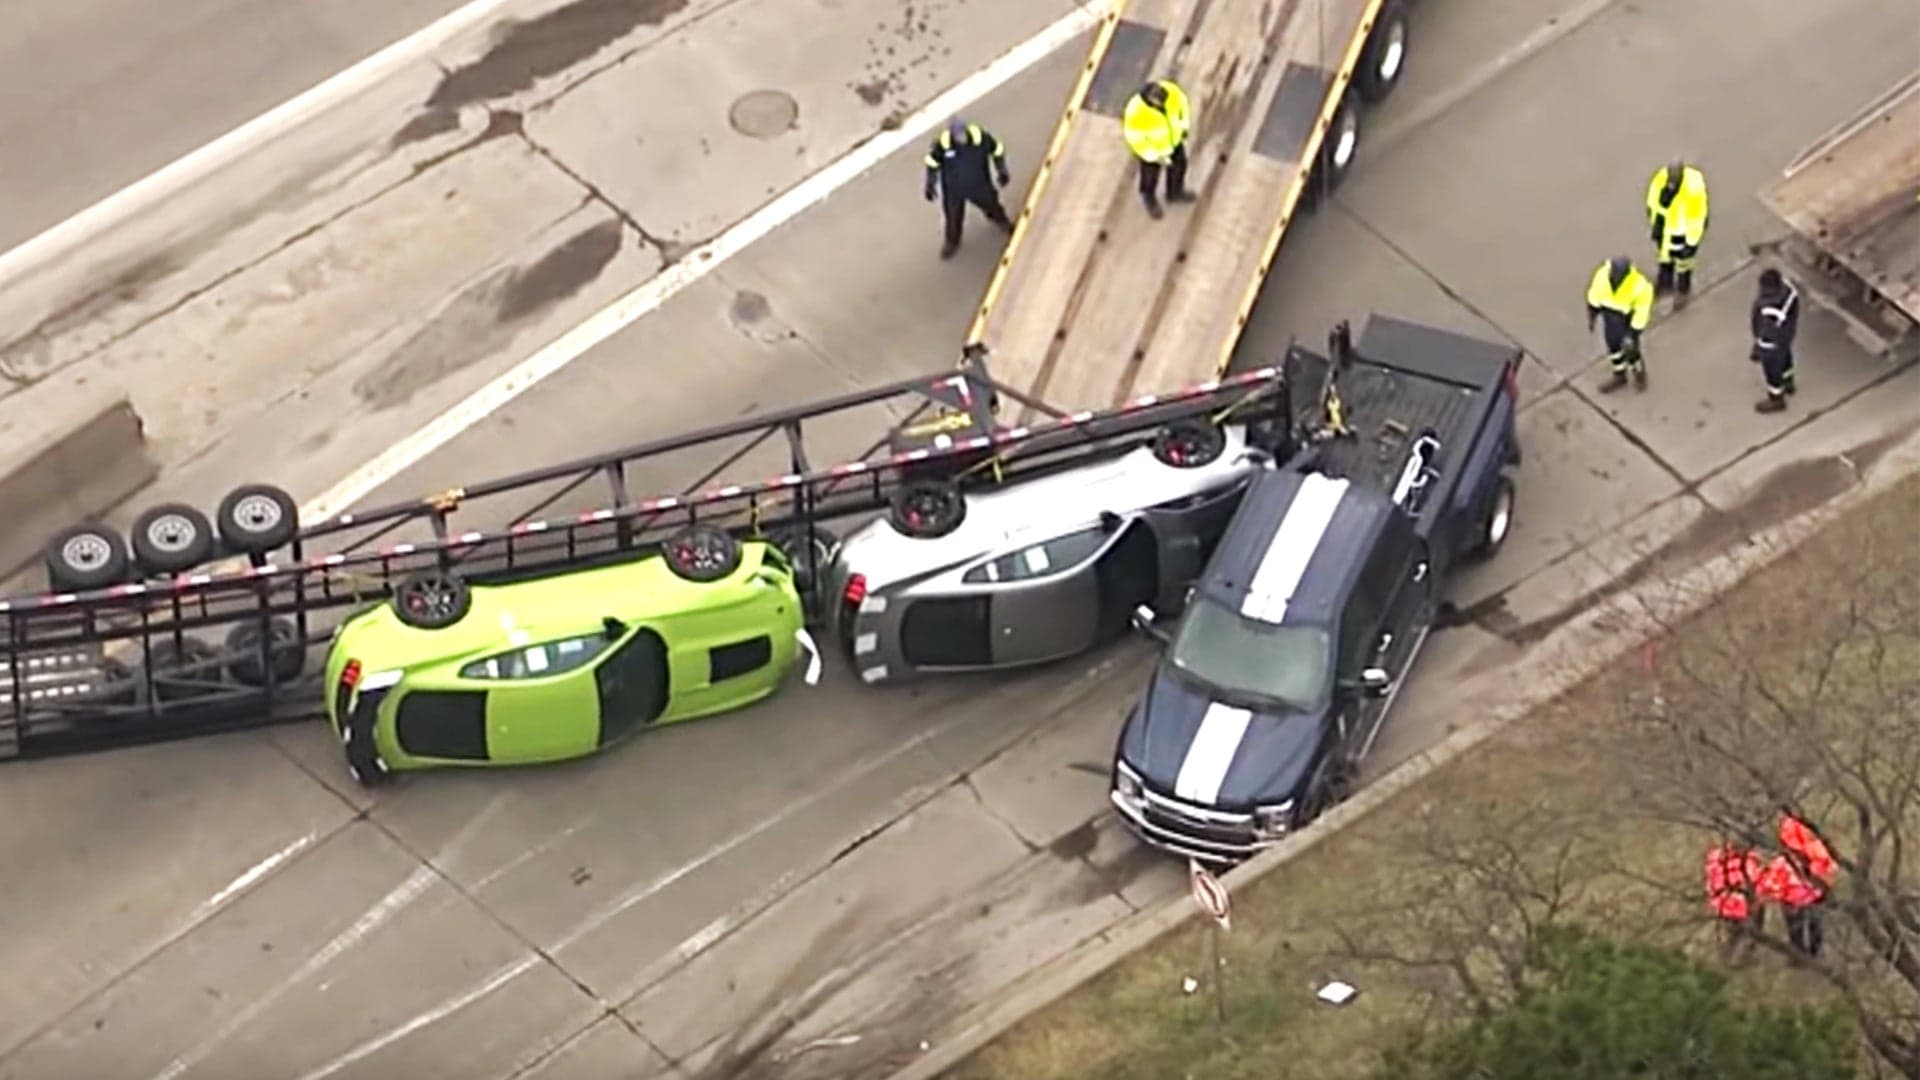 Car Carrier Hauling New 2020 Ford Mustang Shelby GT500s Flips in Detroit (UPDATE)